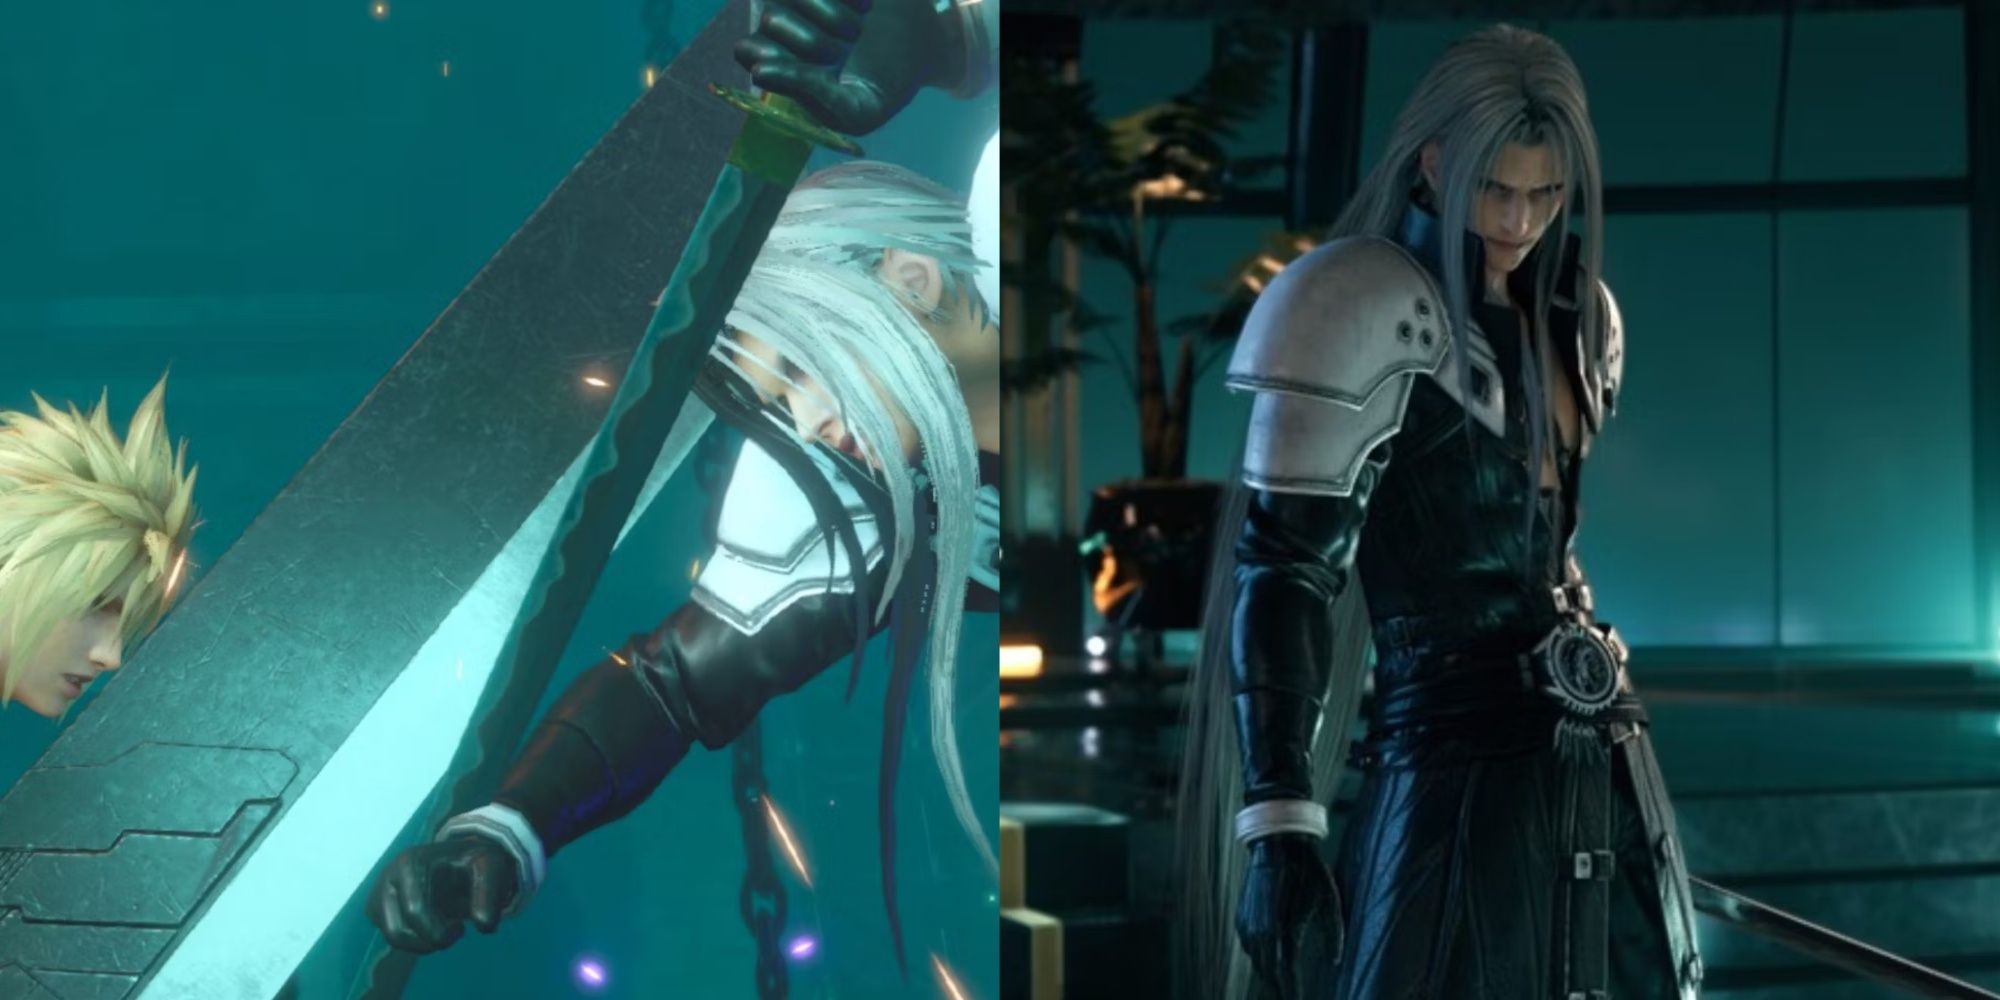 Who Is Sephiroth In Final Fantasy?